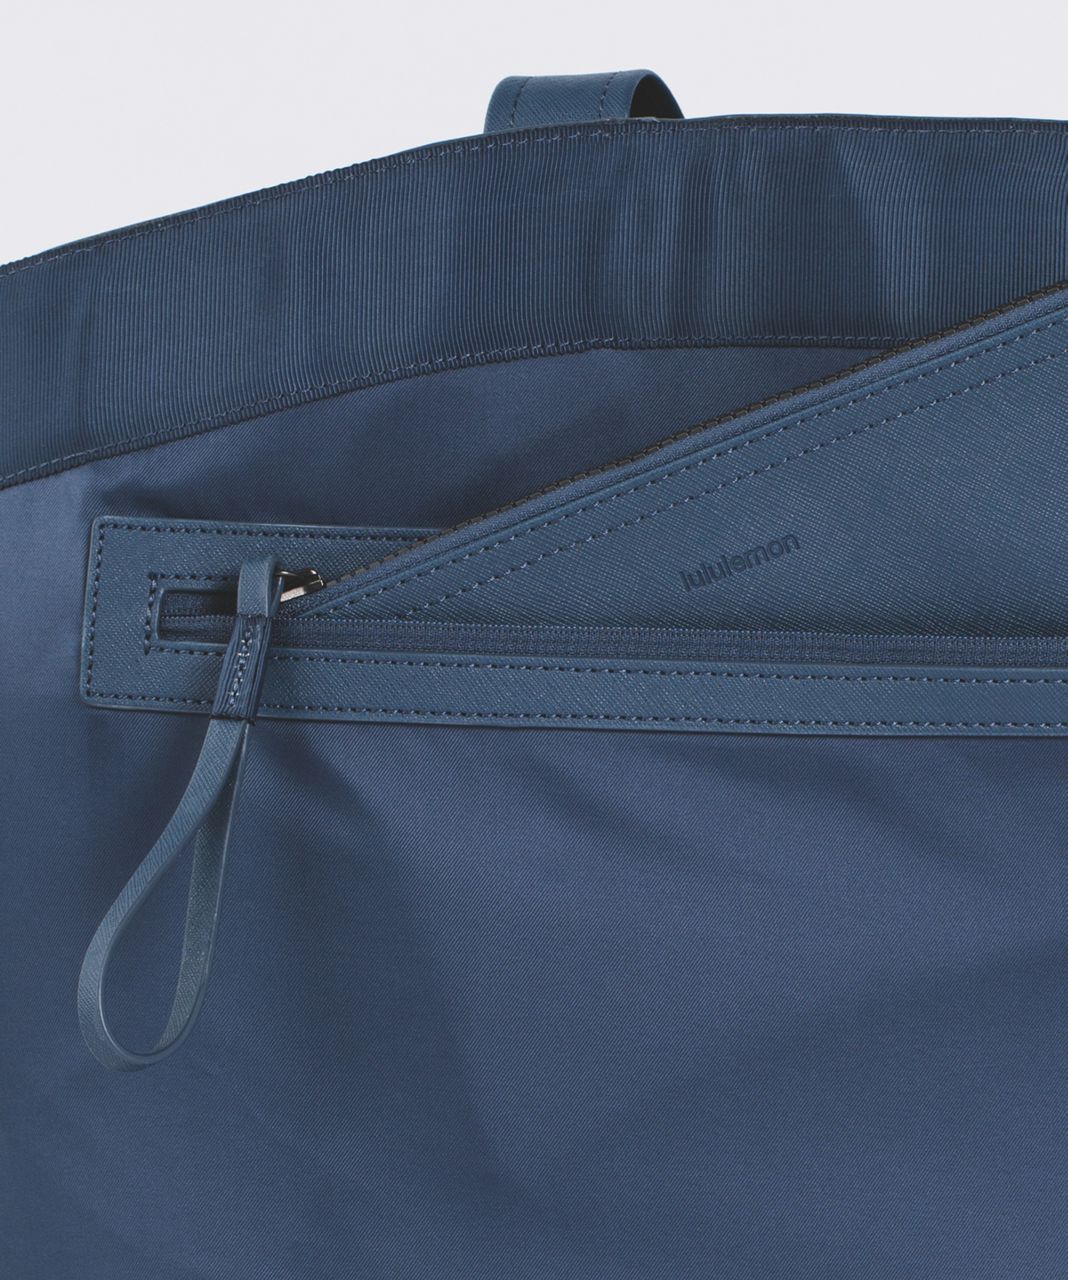 Lululemon All Day Tote - Astro Blue